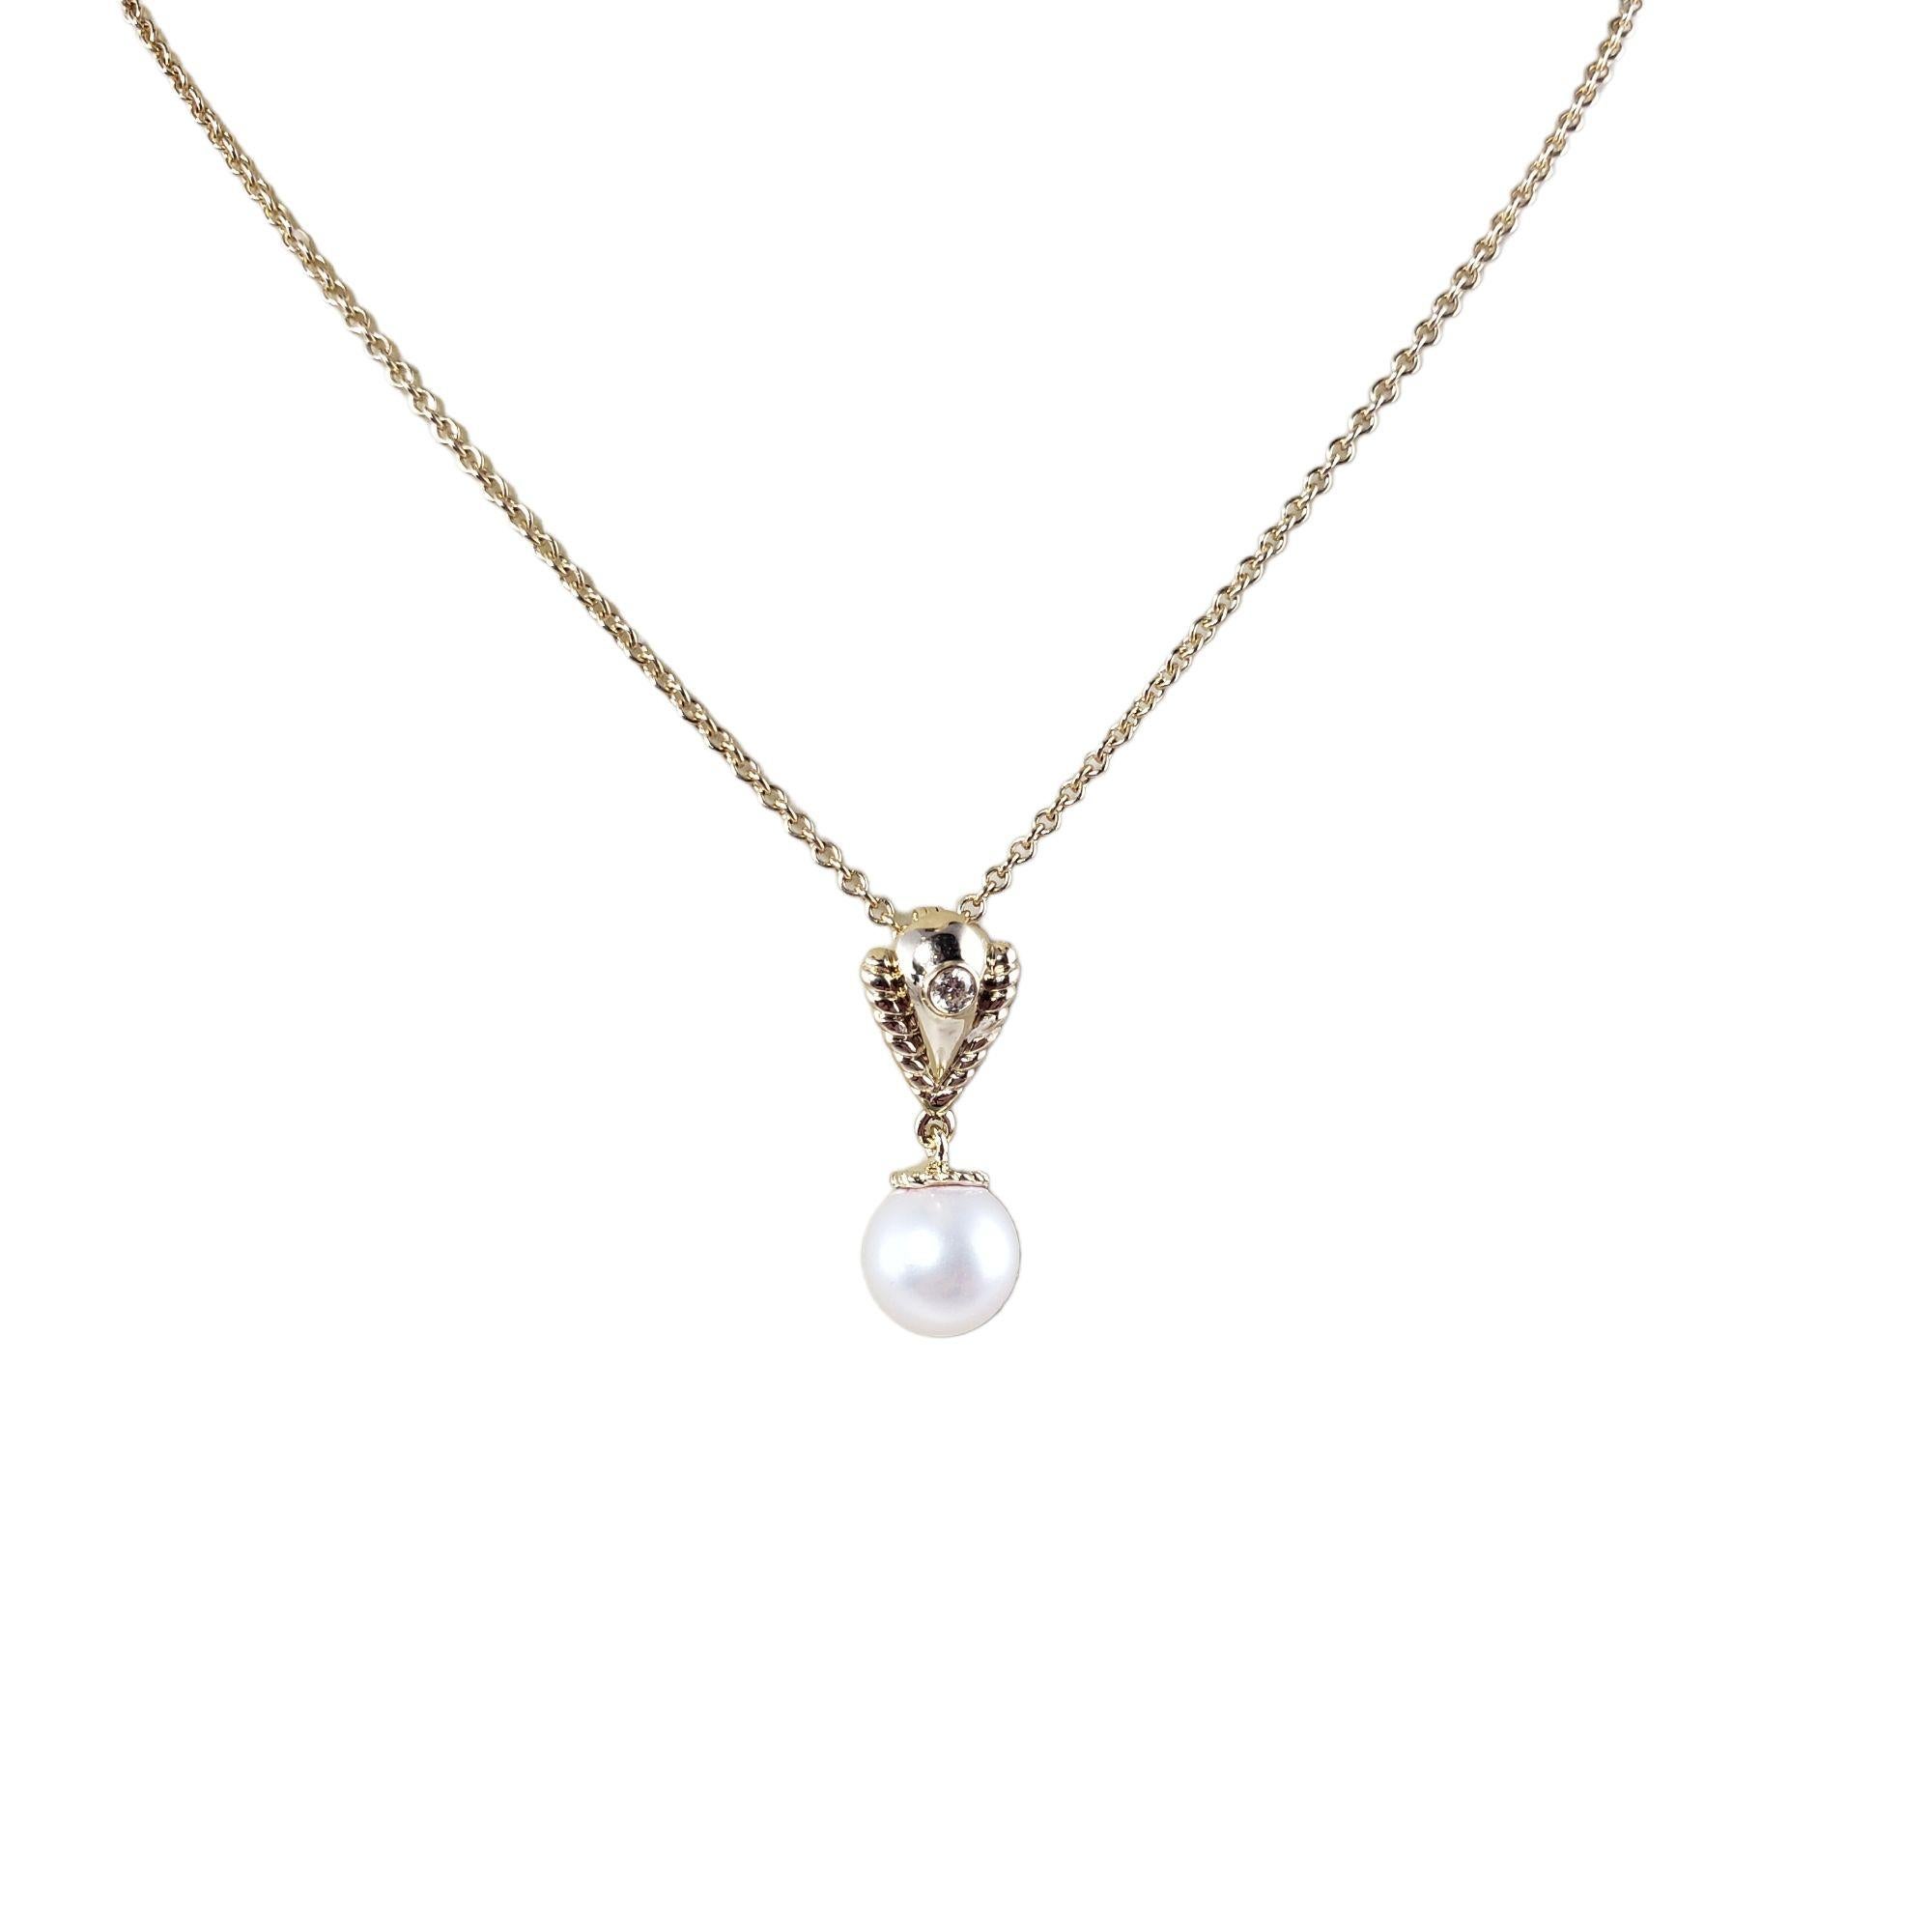 Vintage 14 Karat Yellow Gold Pearl and Diamond Pendant Necklace-

This elegant pendant features one 8 mm pearl and one round brilliant cut diamond set in beautifully detailed 14K yellow gold. Suspends from a classic cable necklace.

Approximate